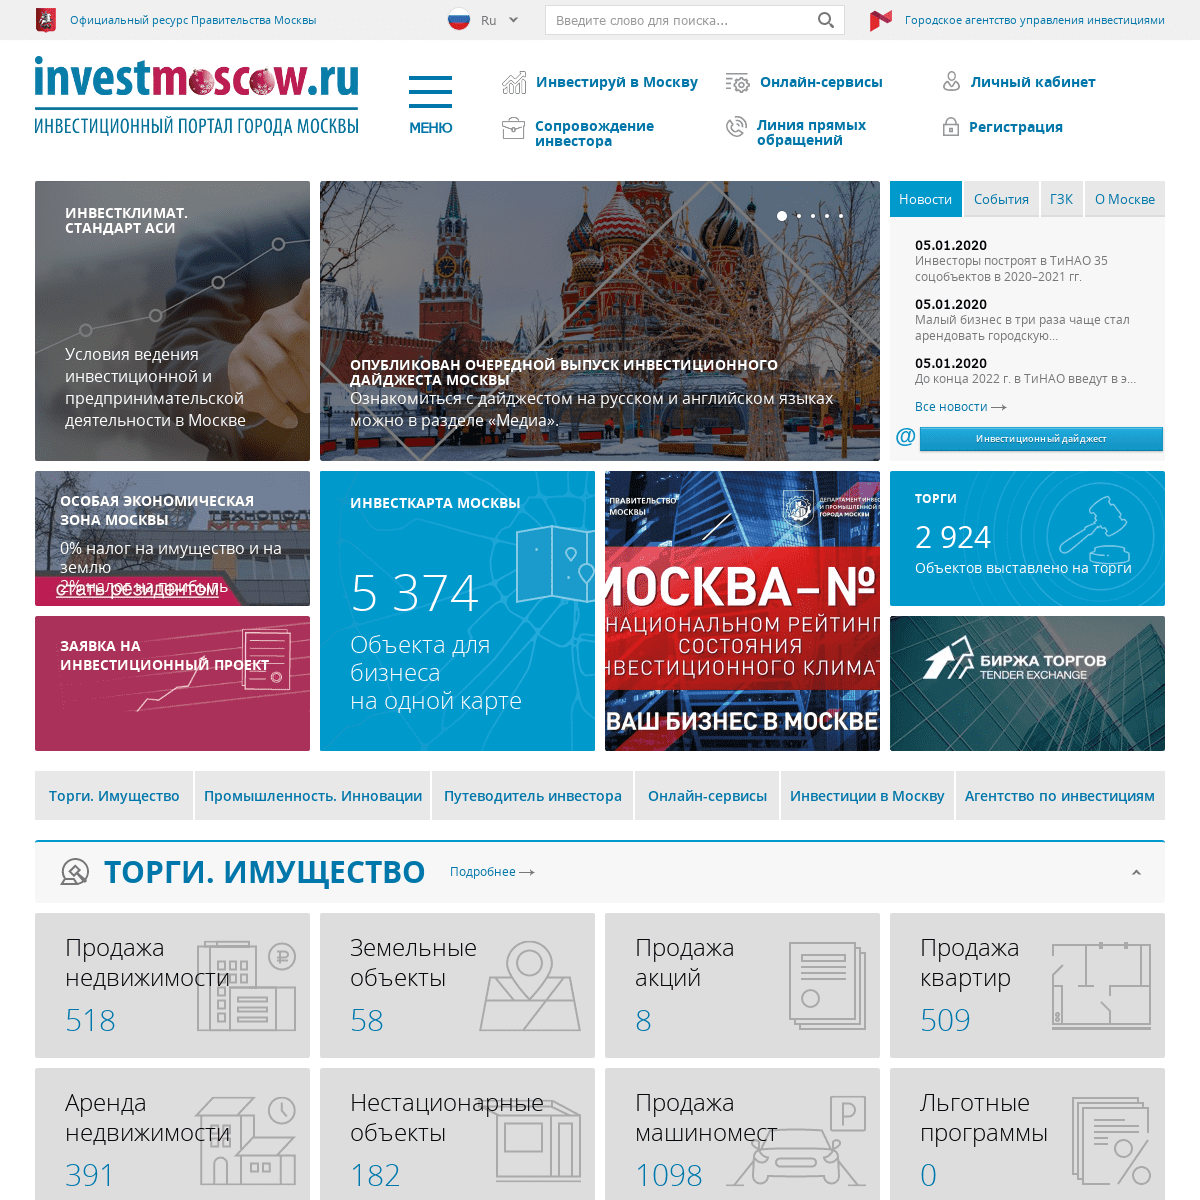 A complete backup of investmoscow.ru